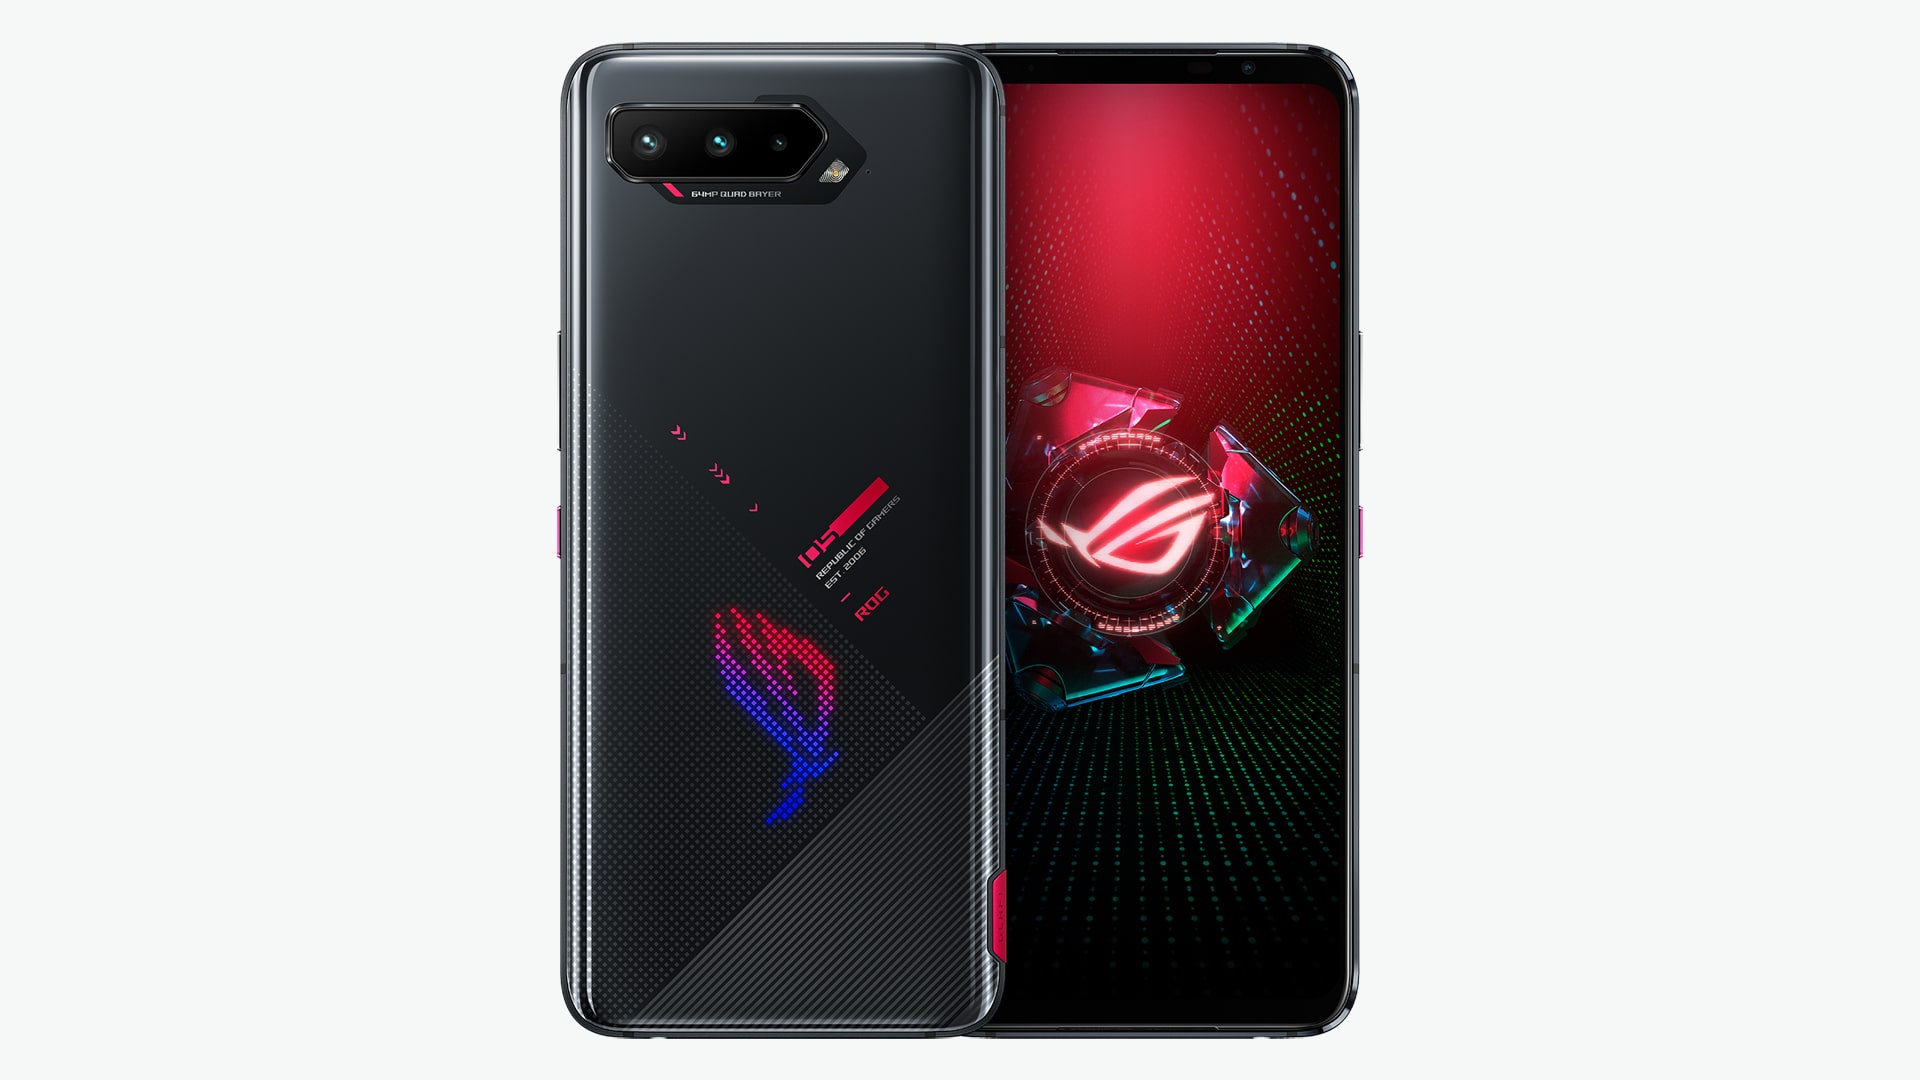 ASUS ROG Phone 5 displayed, showcasing its gaming-centric design and features